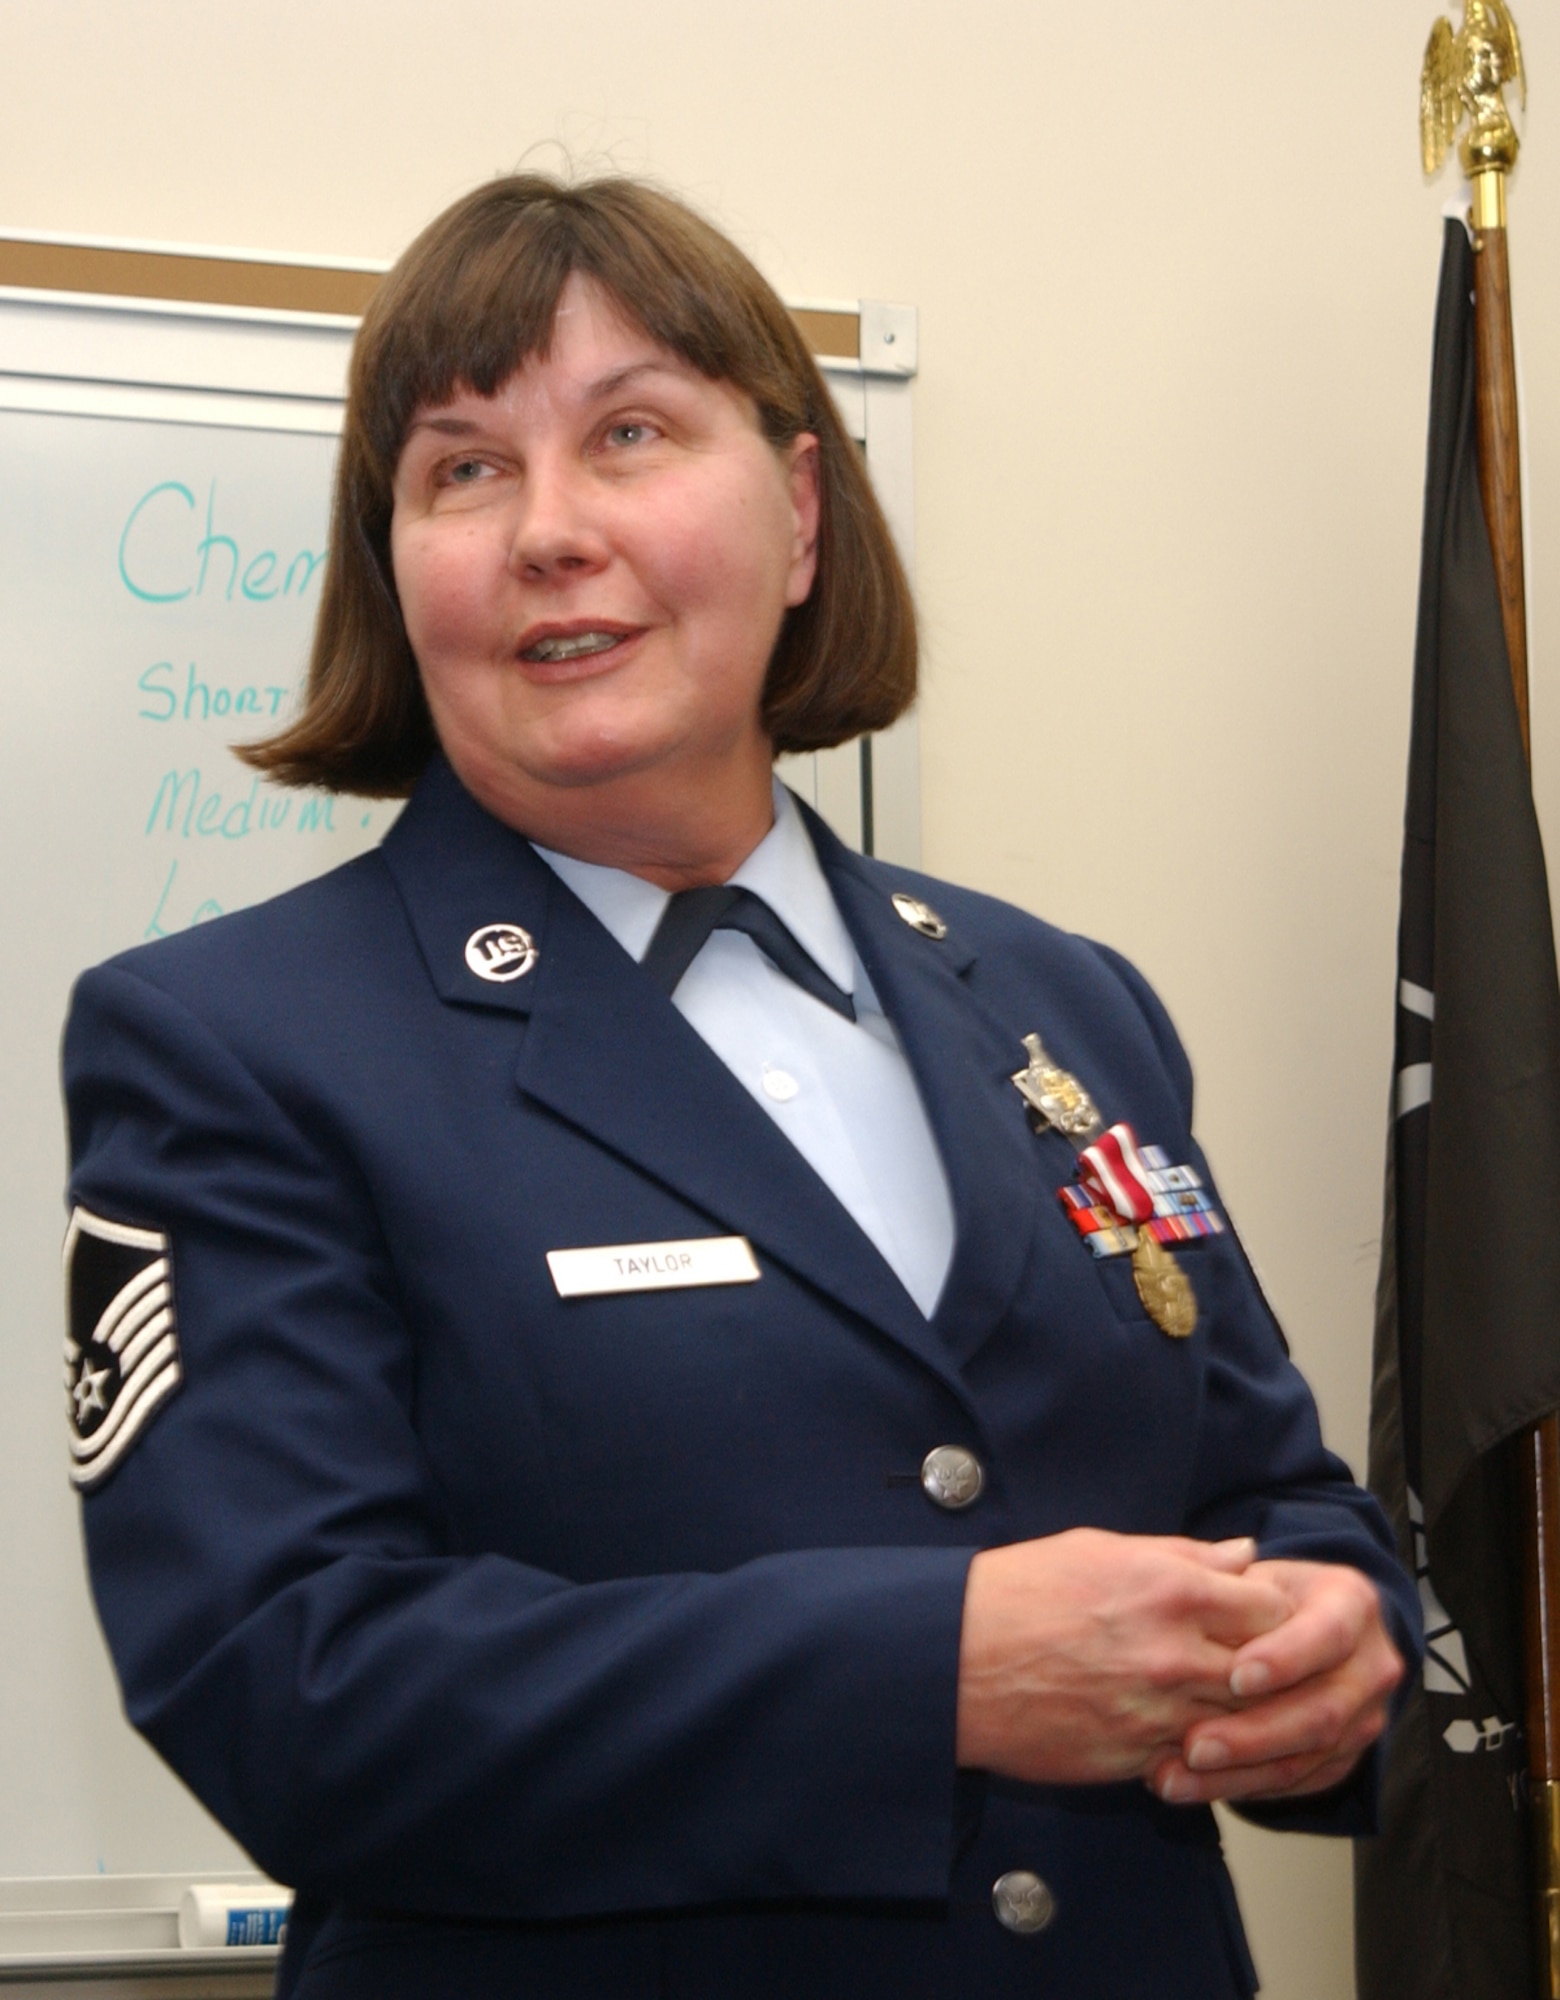 YOUNGSTOWN AIR RESERVE STATION, Ohio — MSgt. Frances Taylor addresses the audience at her retirement ceremony in December 2007 after nearly 33 years of military service as a firefighter. U.S. Air Force photo/Tech. Sgt. Richard Lisum